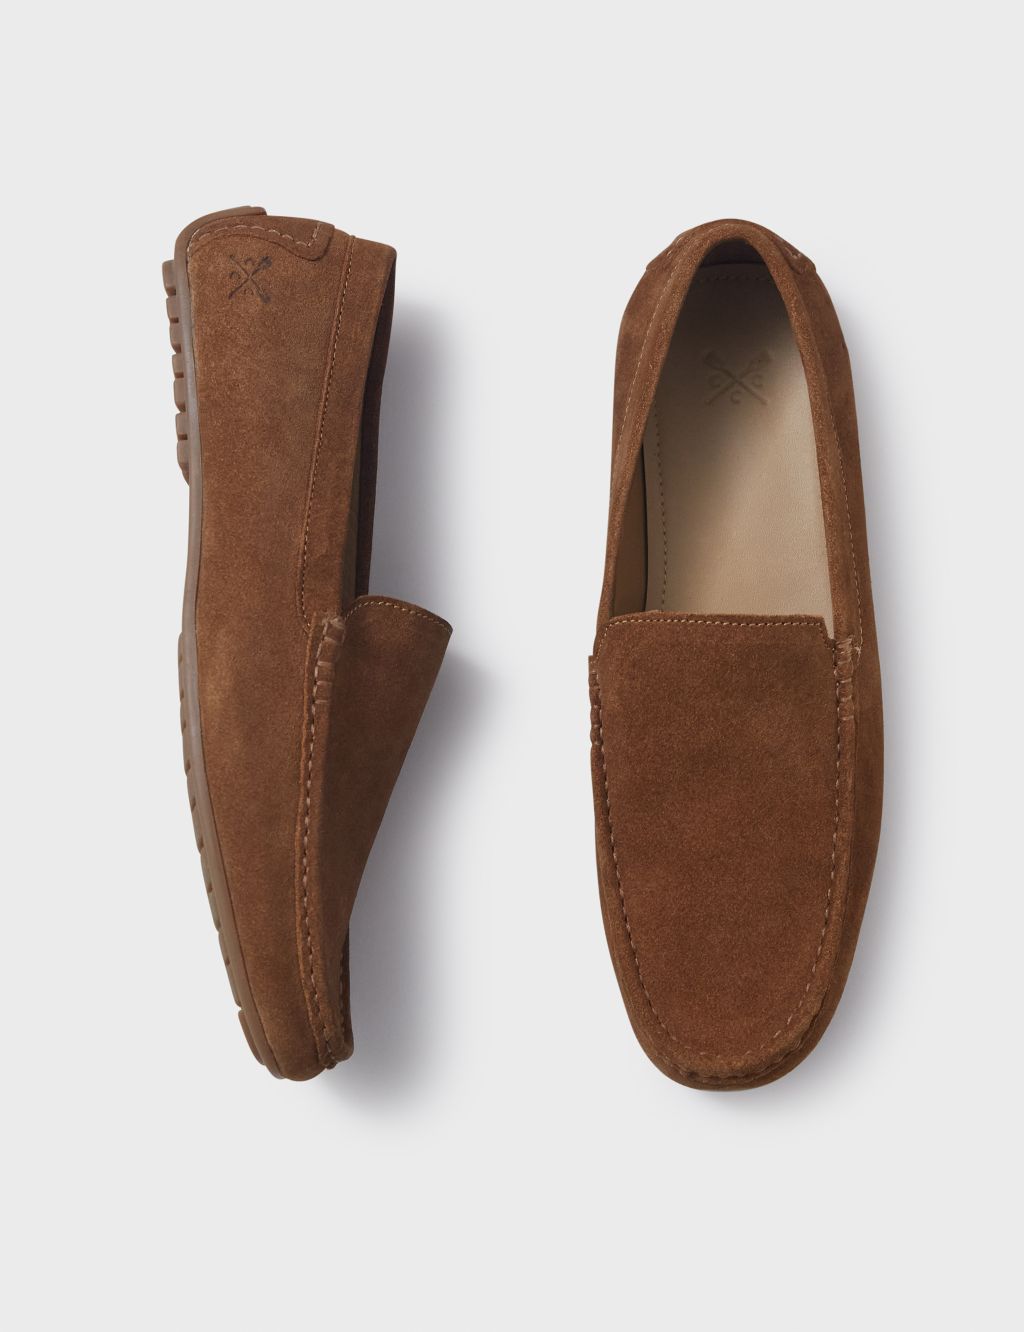 Suede Slip-On Loafers image 3